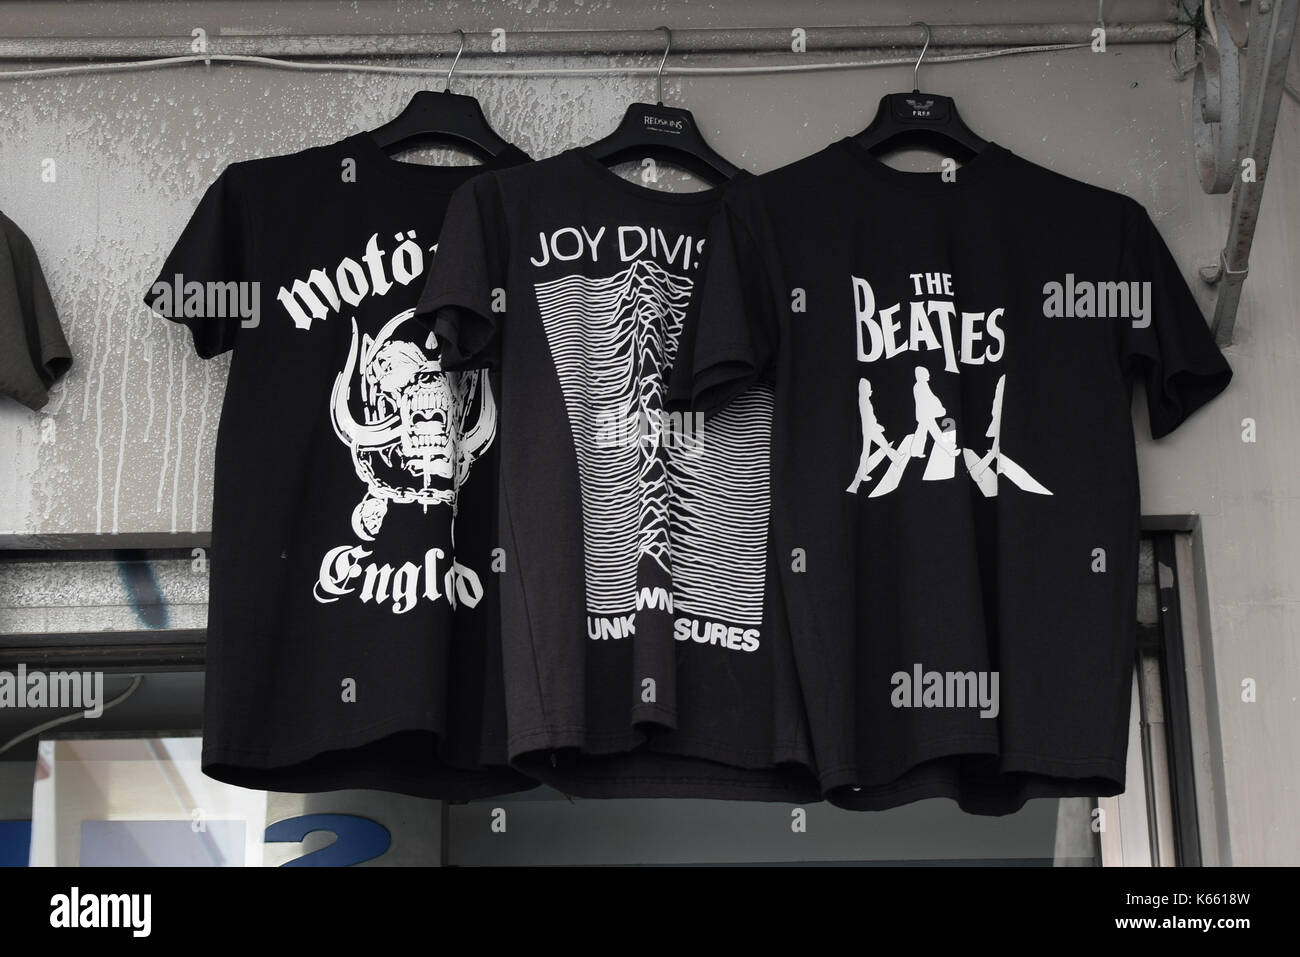 ATHENS, GREECE - AUGUST 4, 2016: Rock music t-shirts printed with band logos for sale. The Beatles, Joy Division and Motorhead designs. Stock Photo